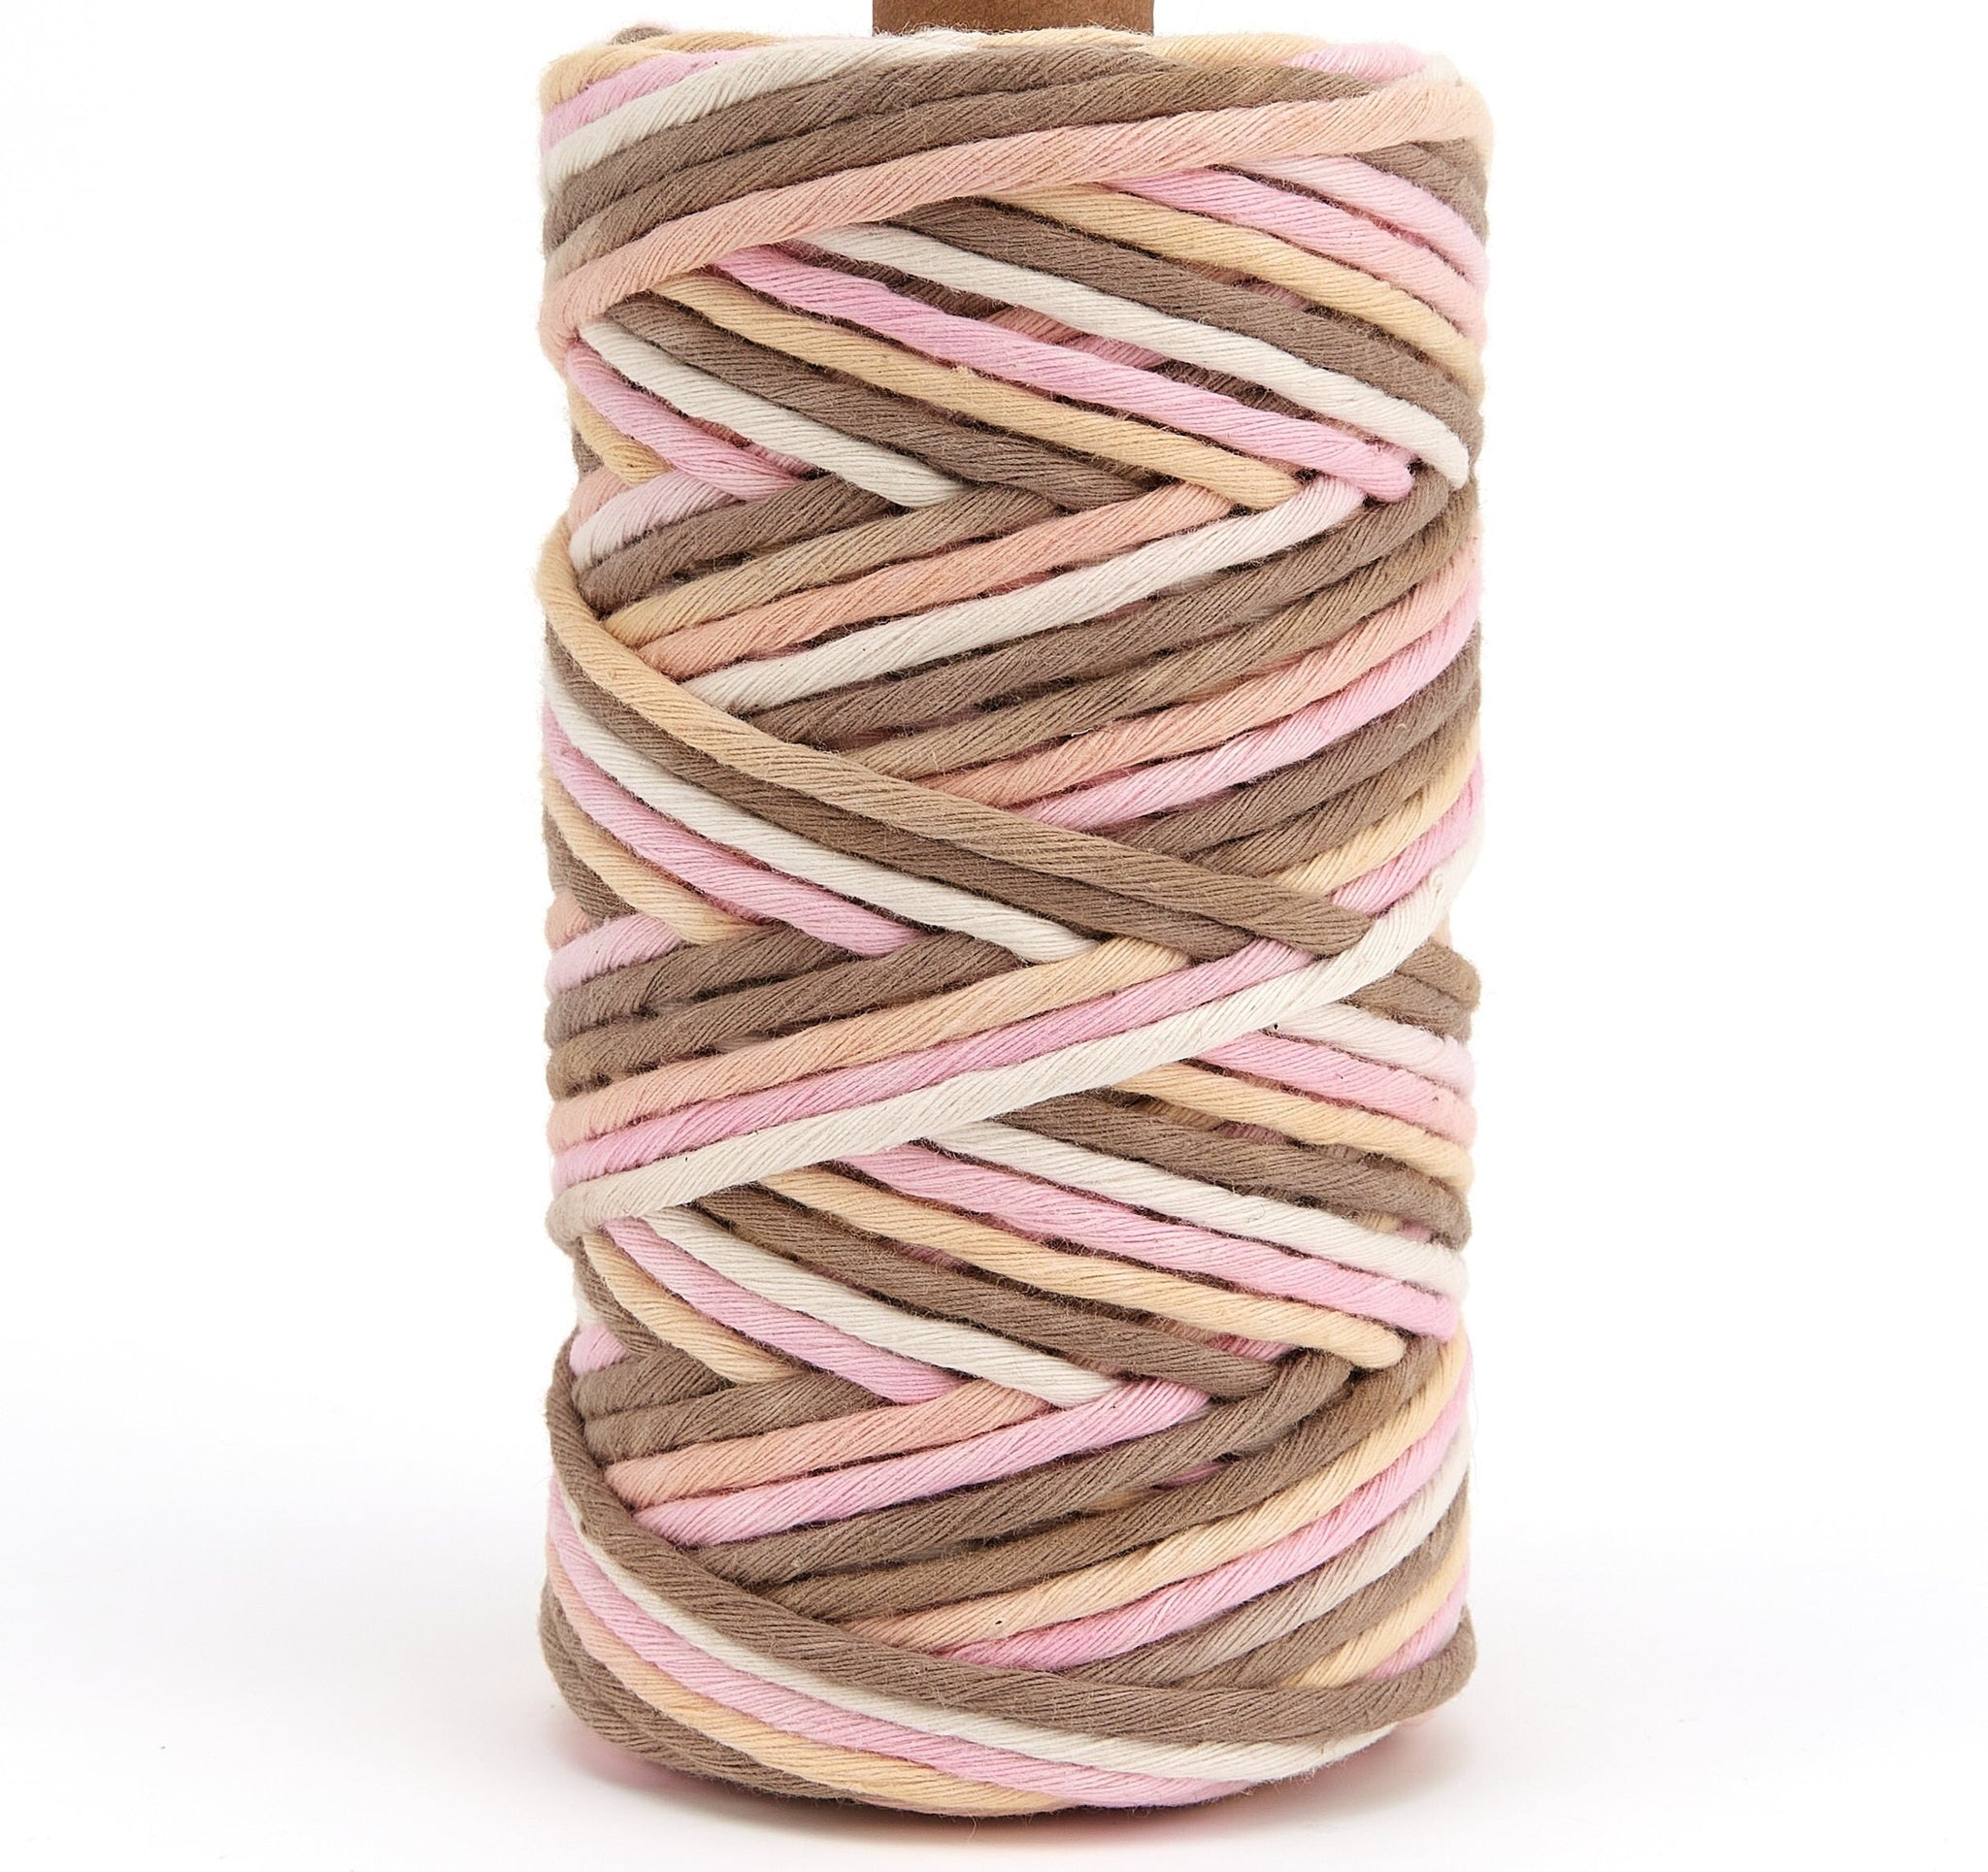 4mm Macrame Cord - Single Twist - Multicolor - Natural Browne and Pink